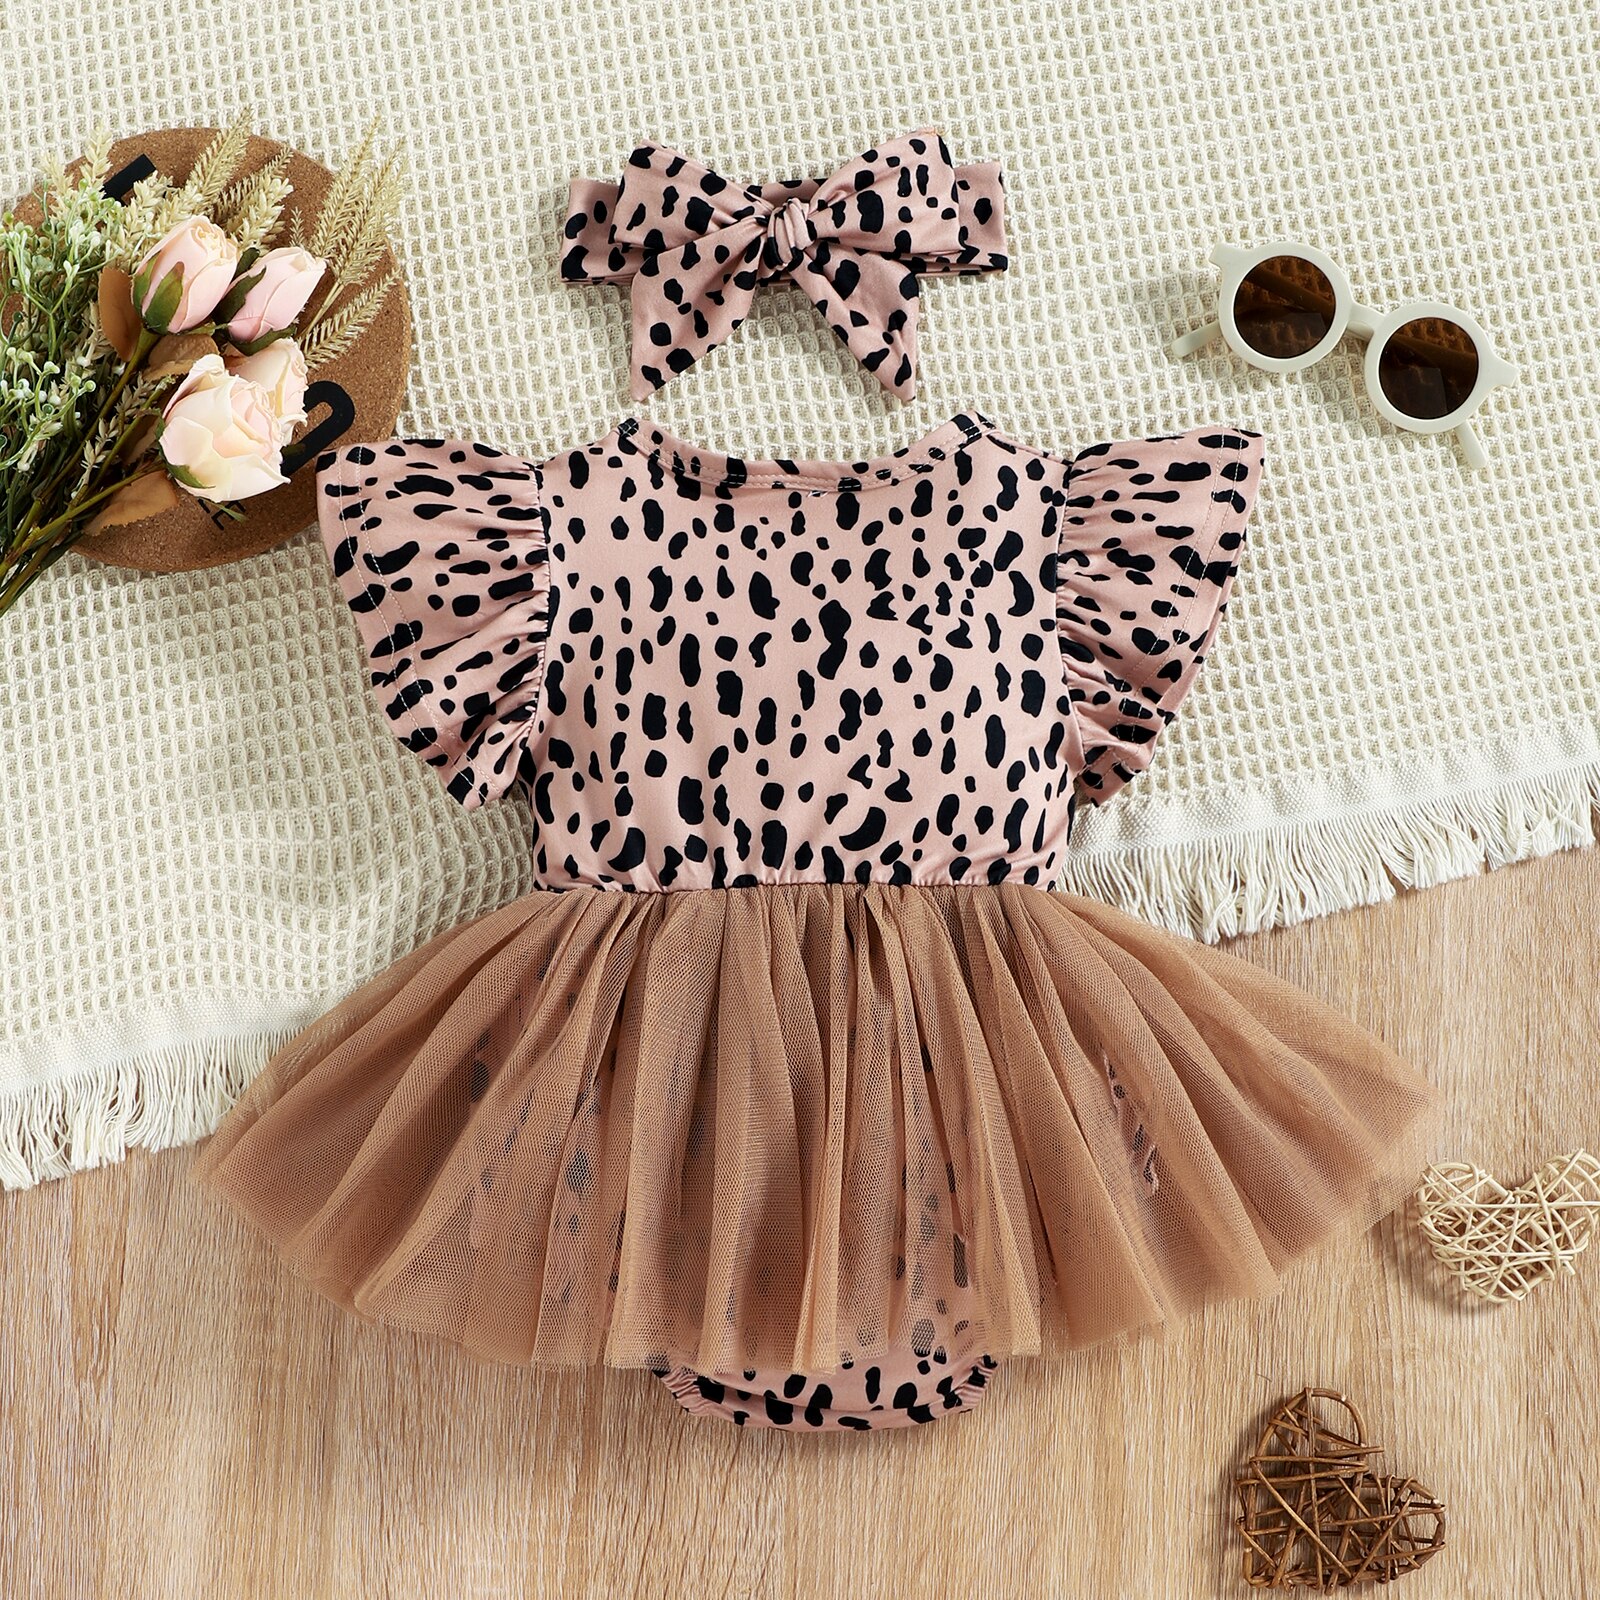 Ma-Baby-0-12M-Newborn-Infant-Baby-Girls-Romper-Leopard-Print-Tulle-Jumpsuit-Playsuit-Summer-Clothes-1